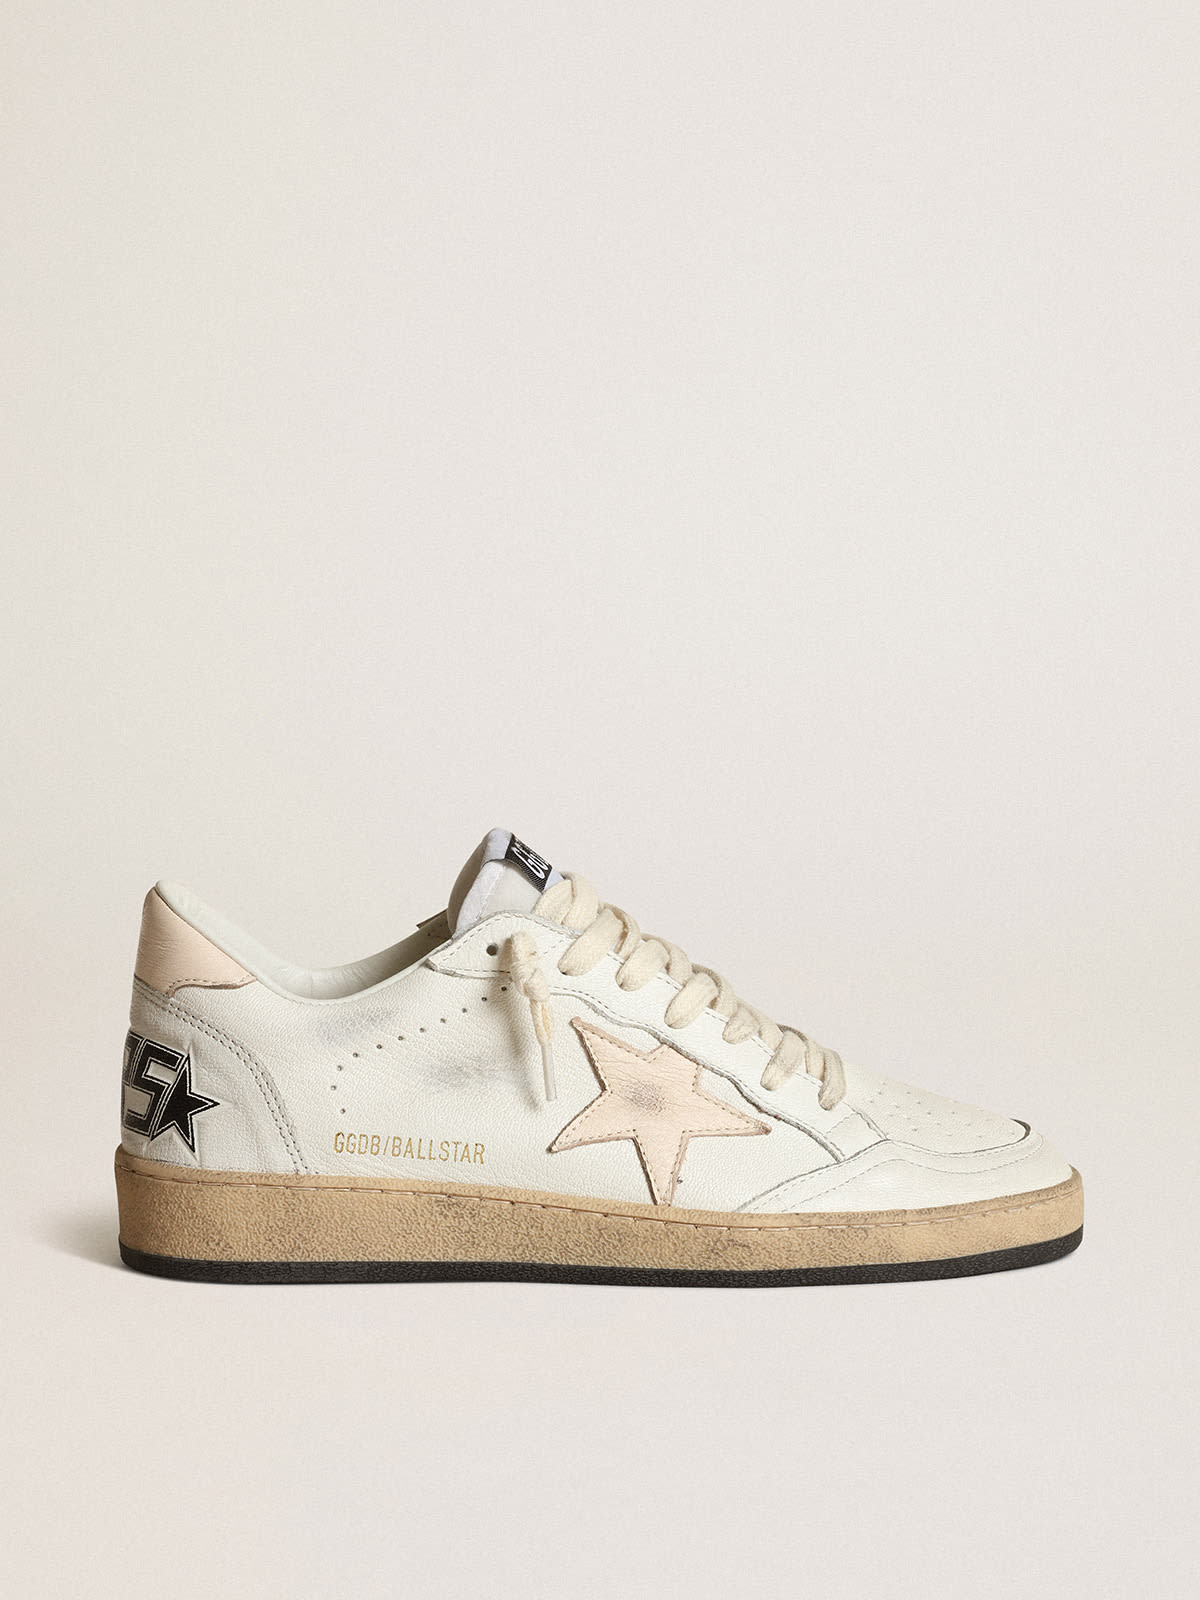 Golden Goose - Ball Star LTD in white nappa with a salmon-pink nappa star in 